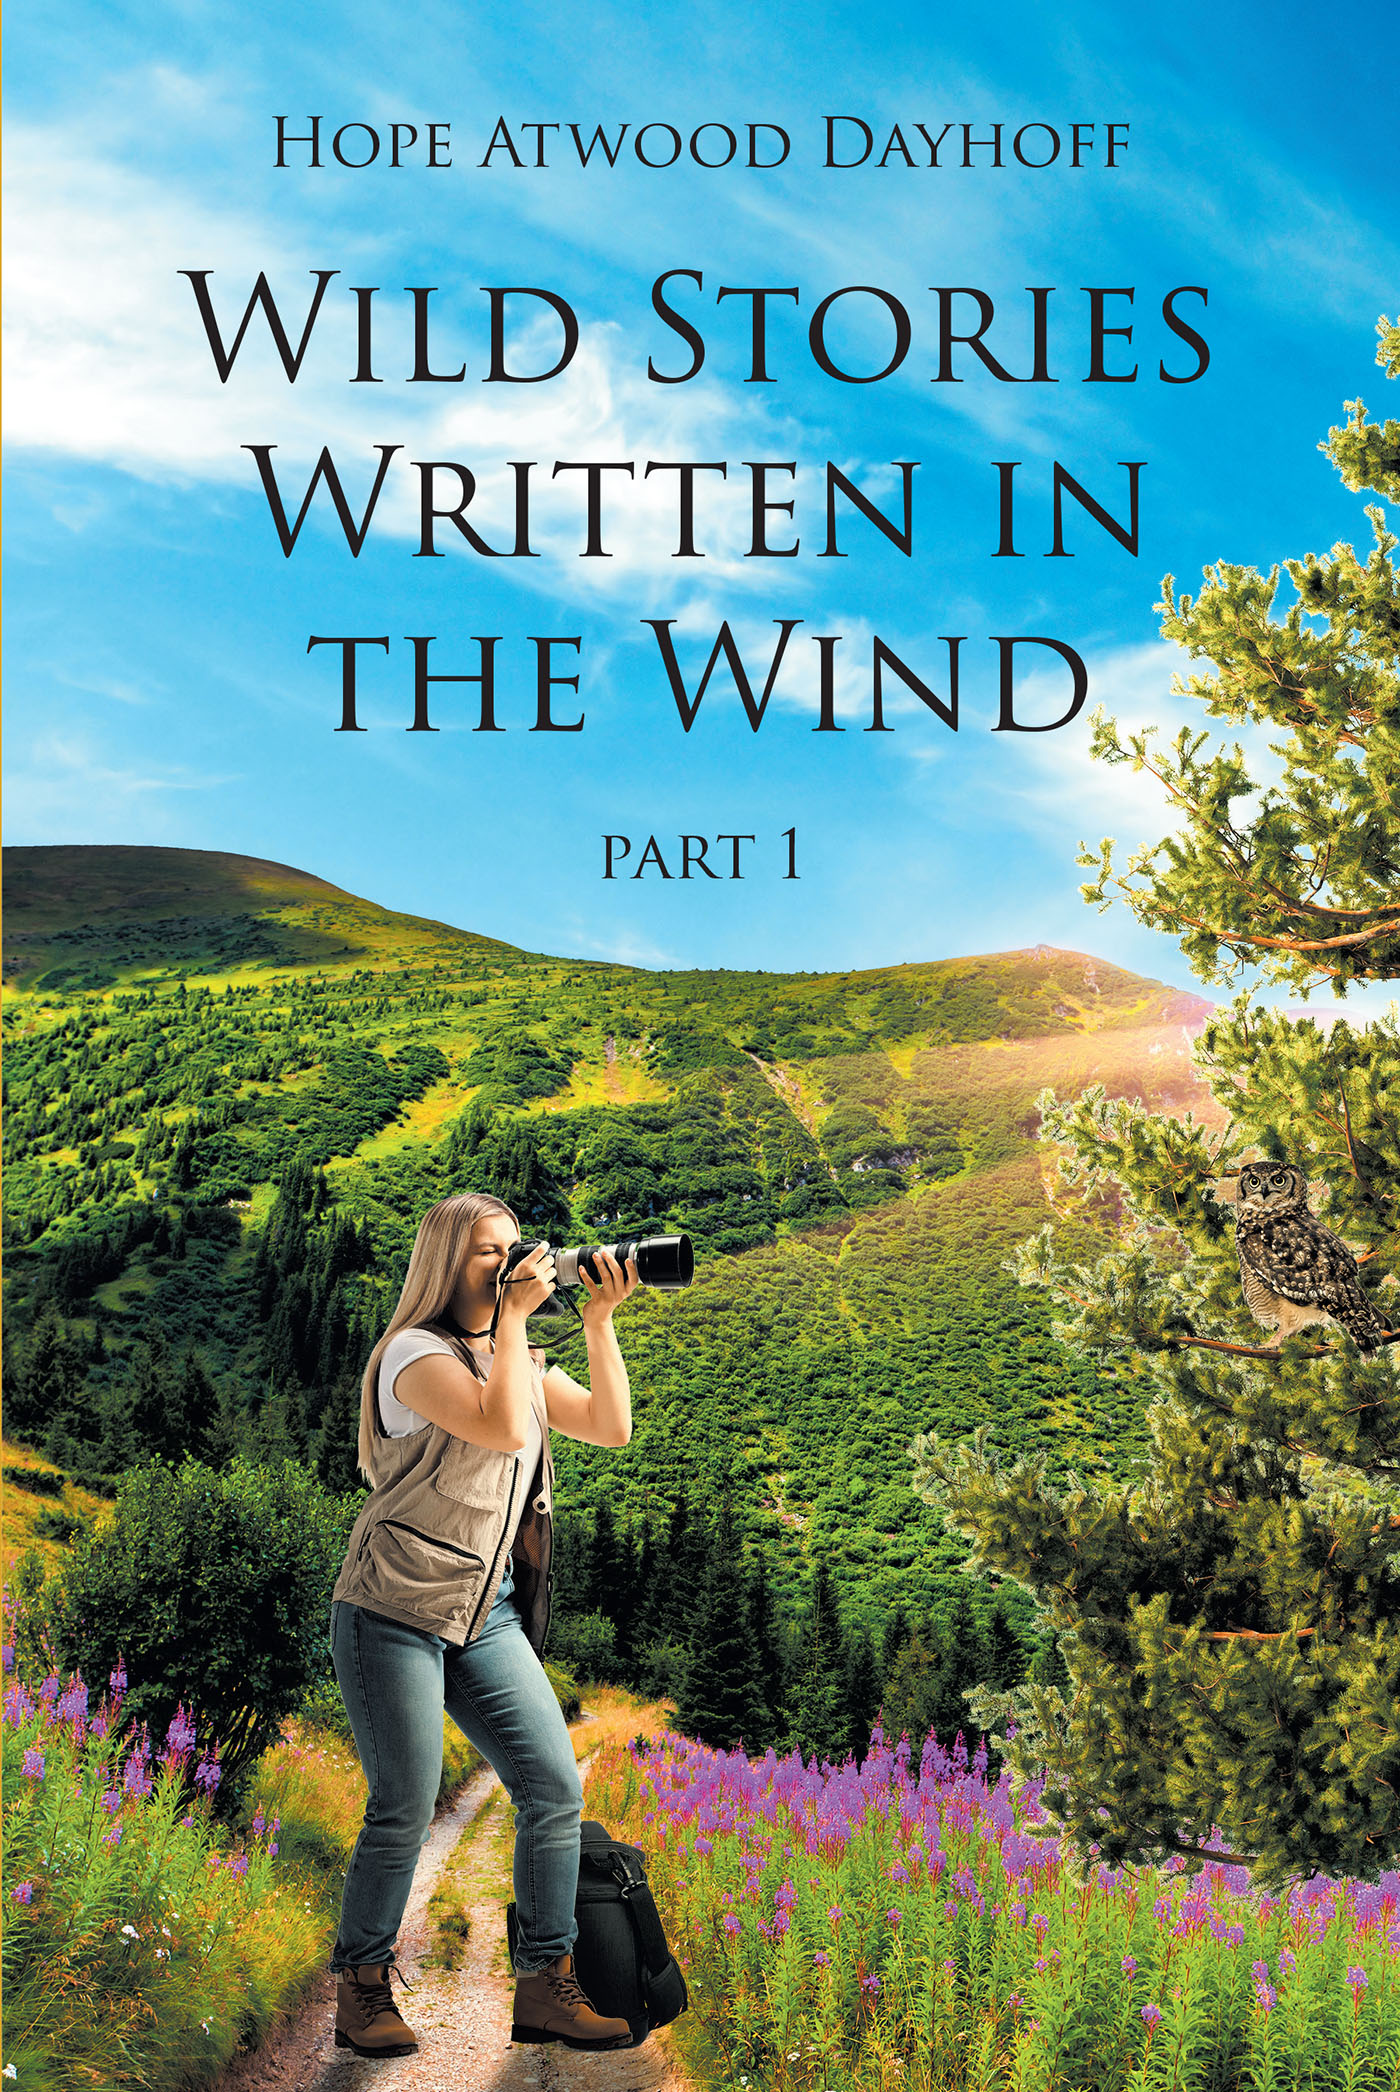 Author Hope Atwood Dayhoff’s New Book, "Wild Stories Written in the Wind: Part 1," Presents a Collection of Beautiful, Informative, and One-of-a-Kind Images